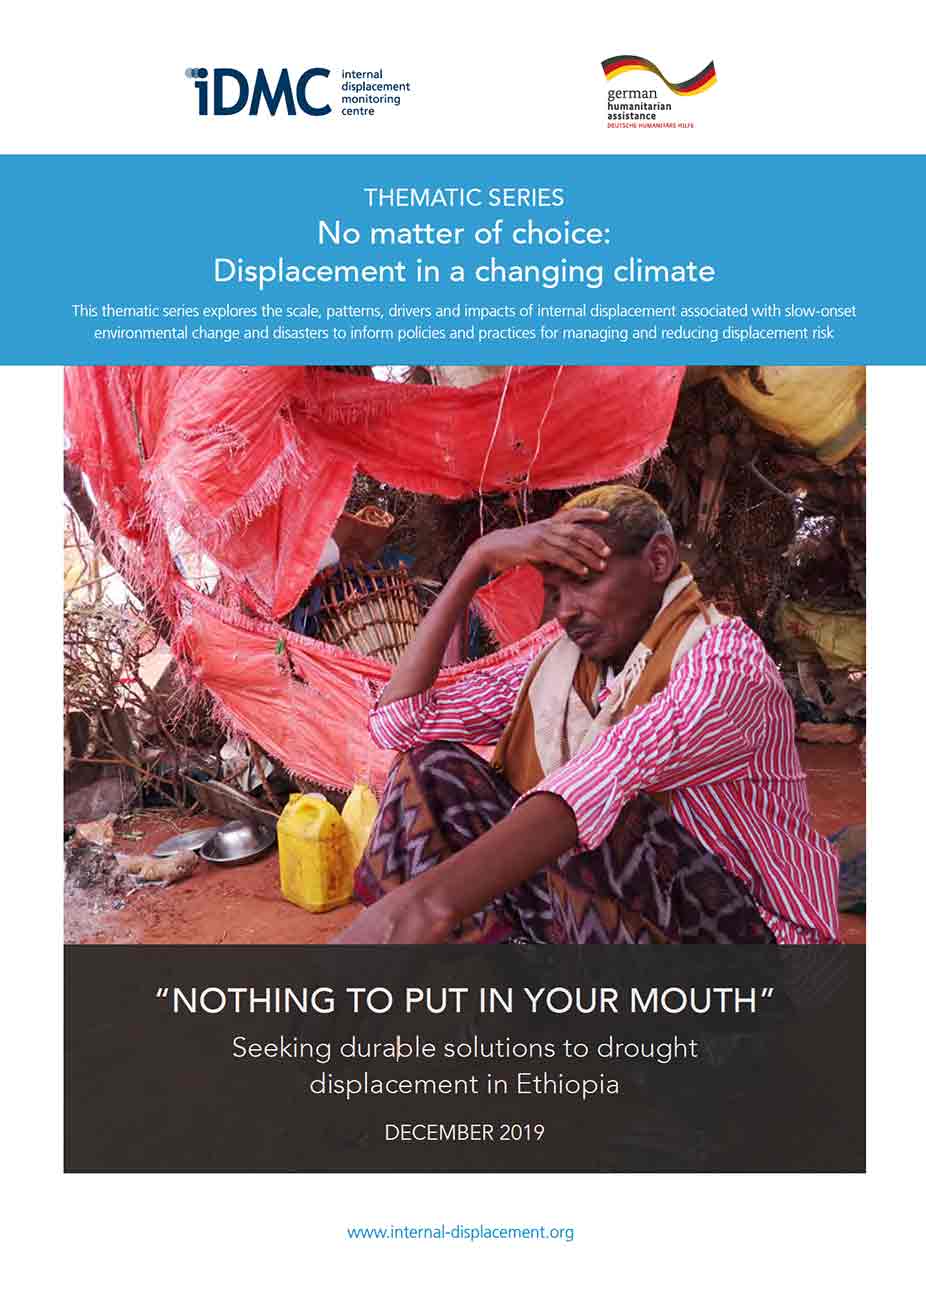 "Nothing to put in your mouth": Durable solutions to drought displacement in Ethiopia